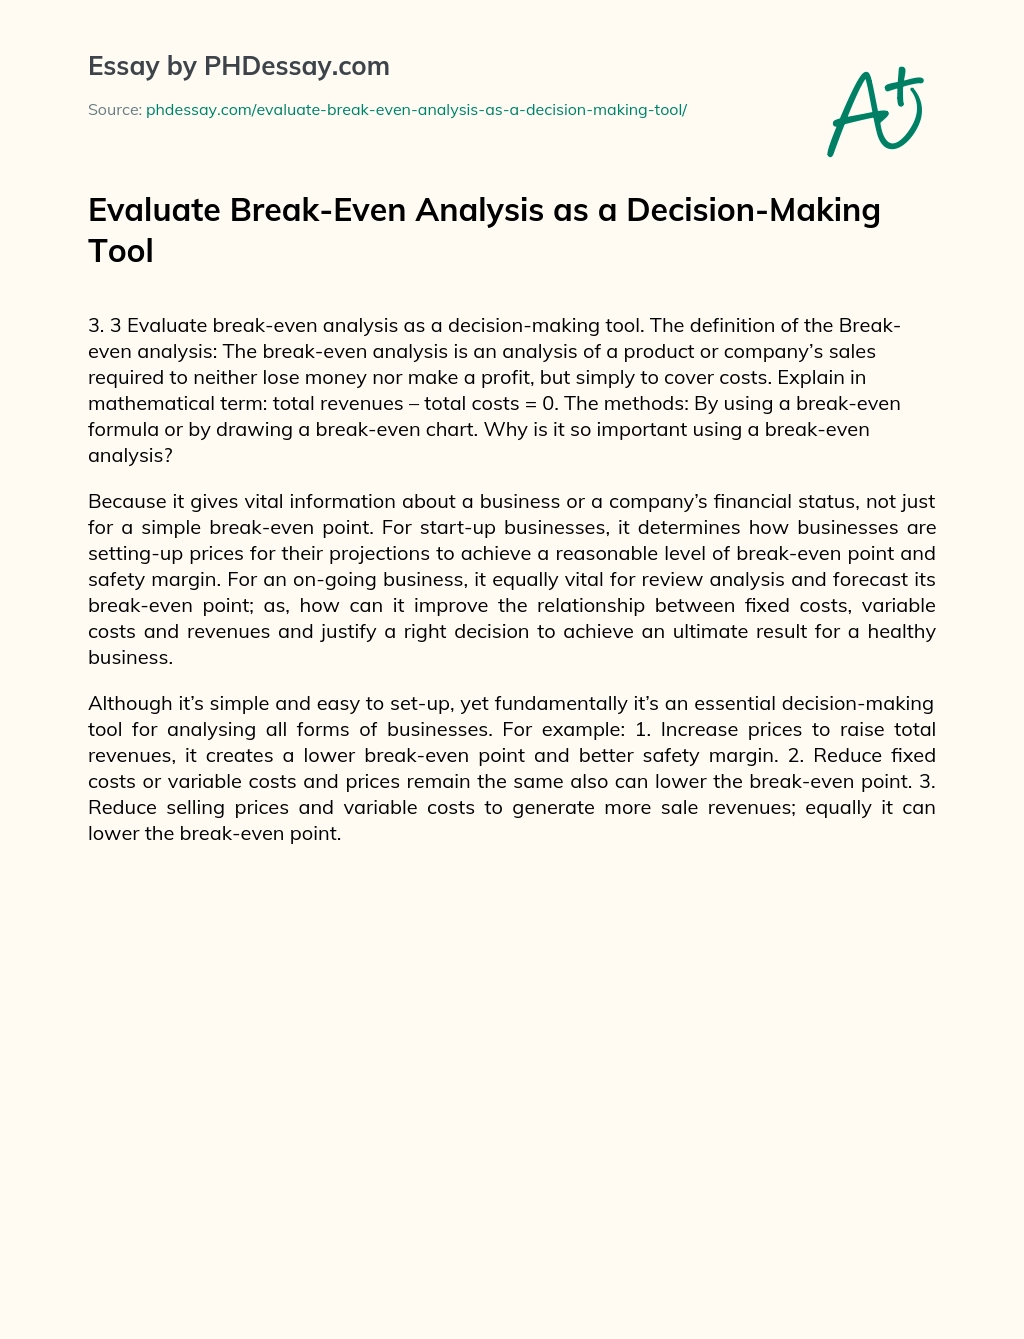 Evaluate Break-Even Analysis as a Decision-Making Tool essay